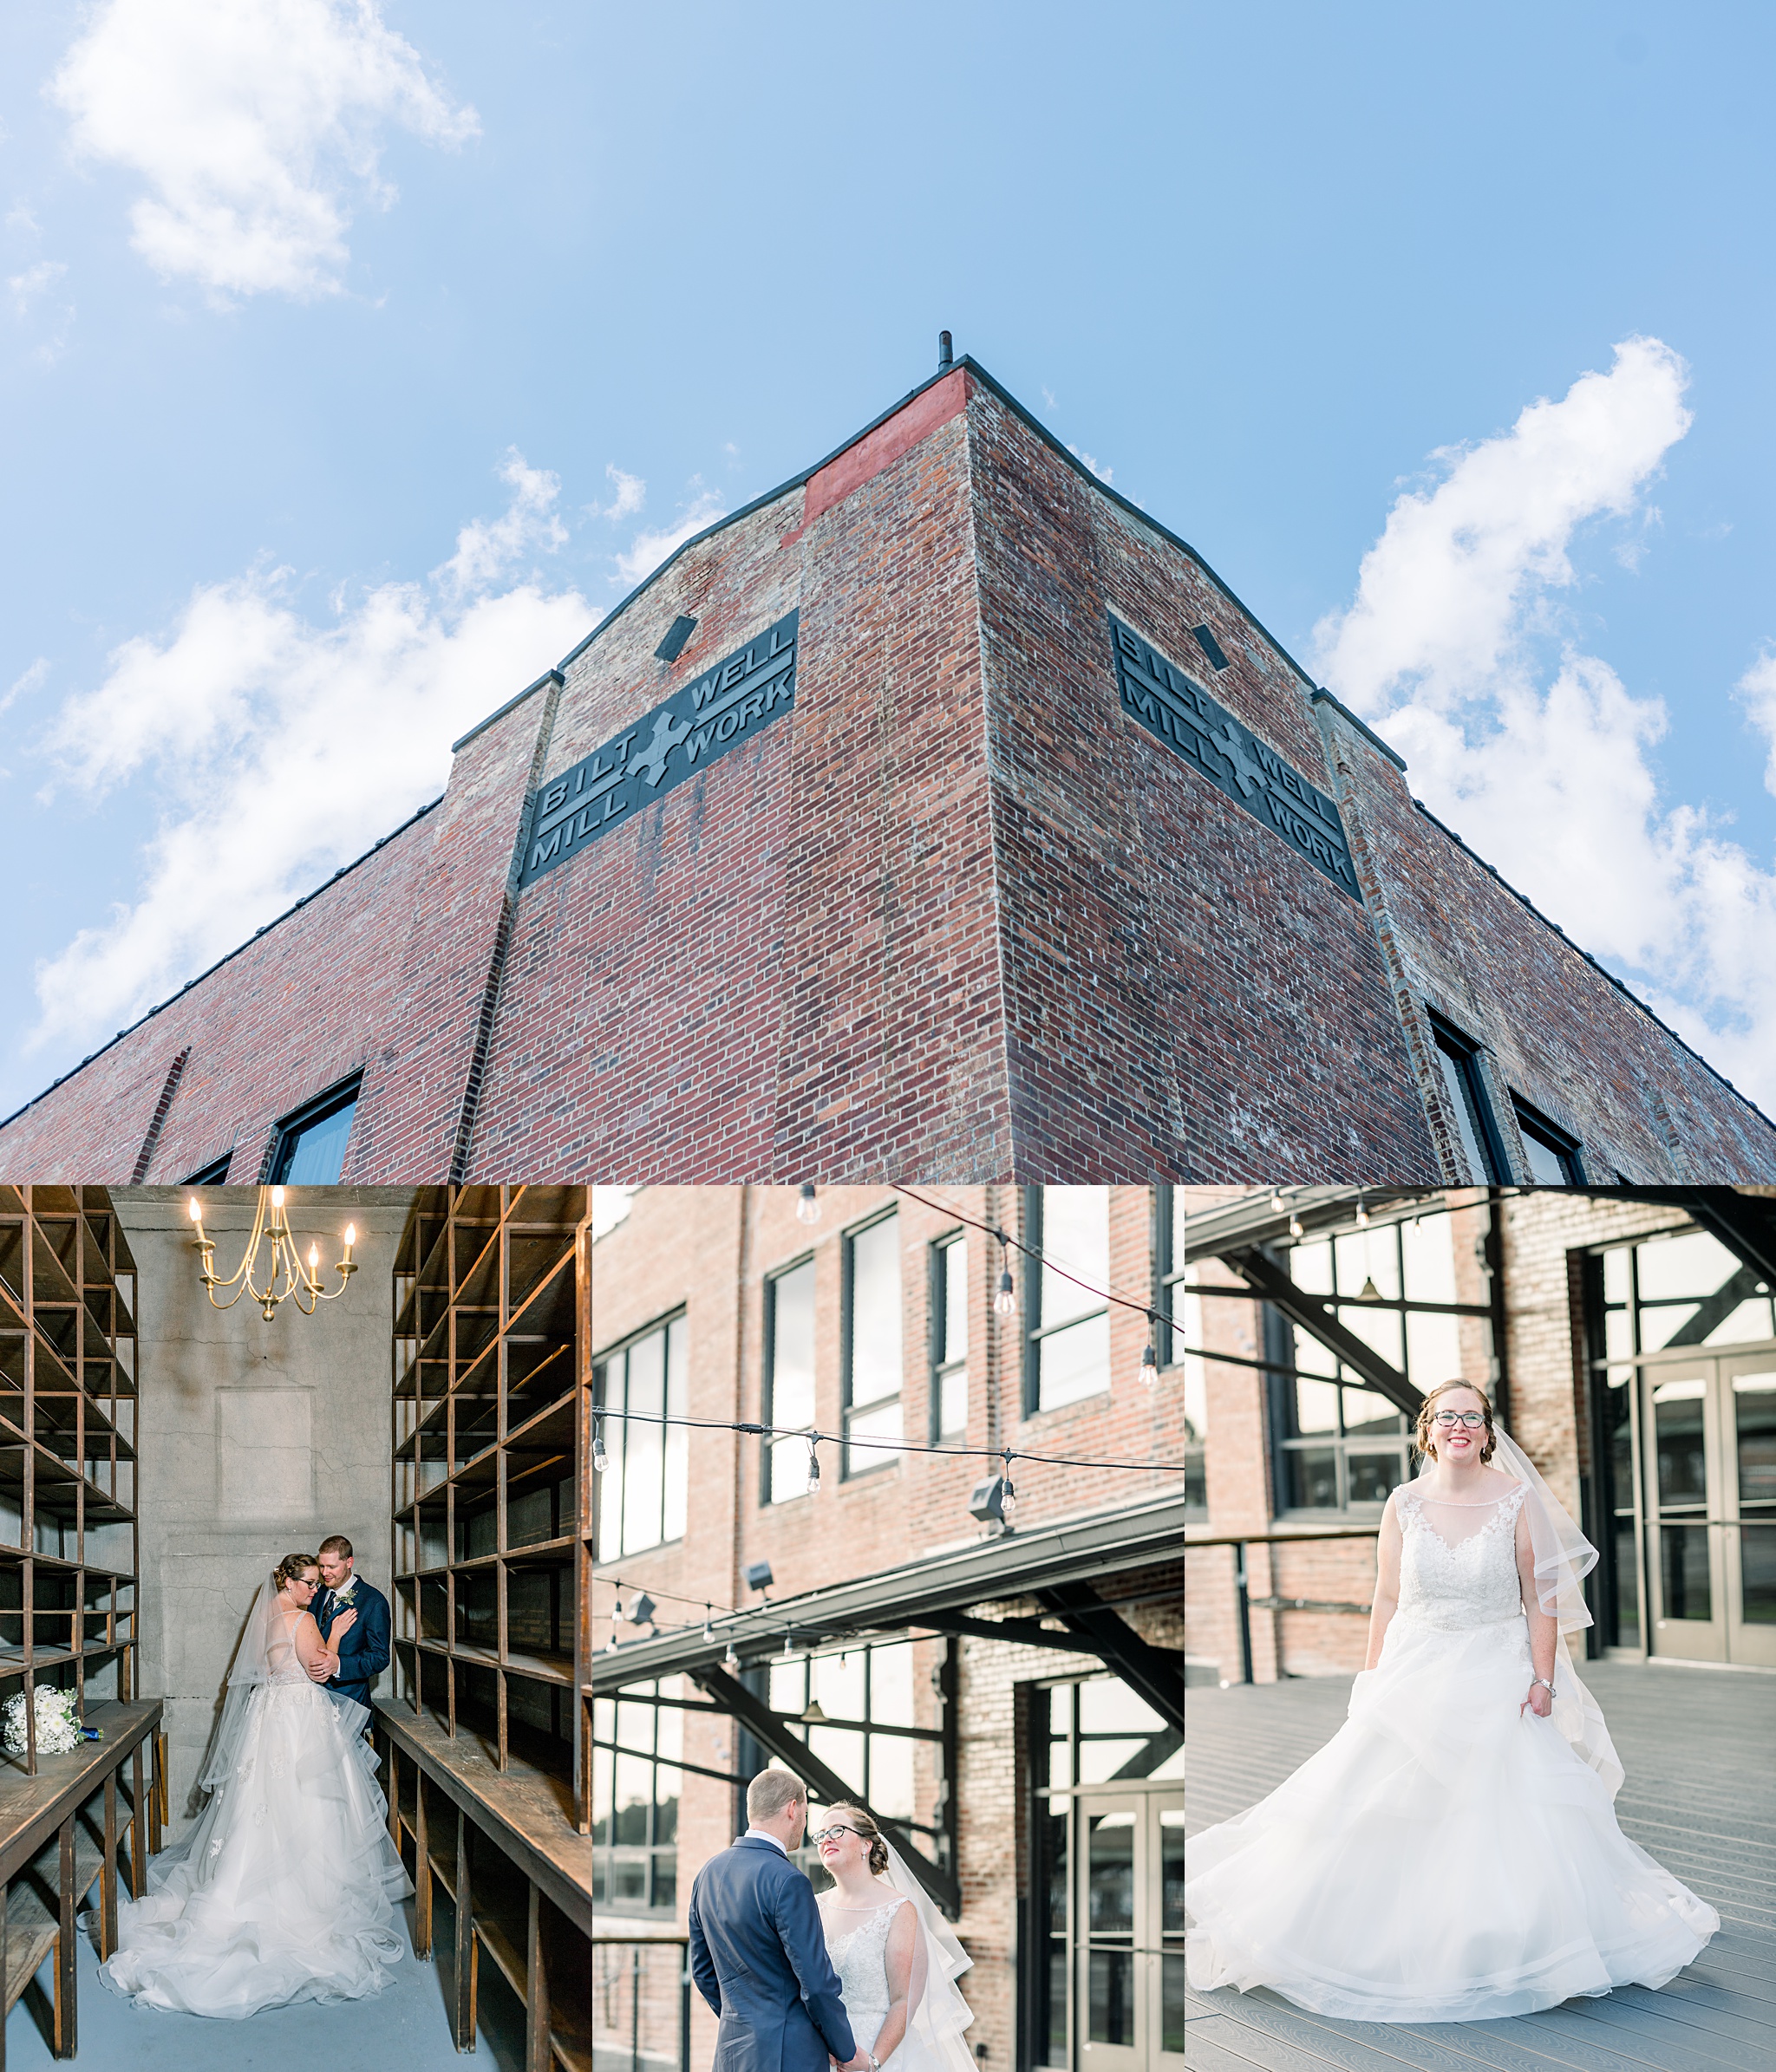 The Best Wedding Venues in Indianapolis